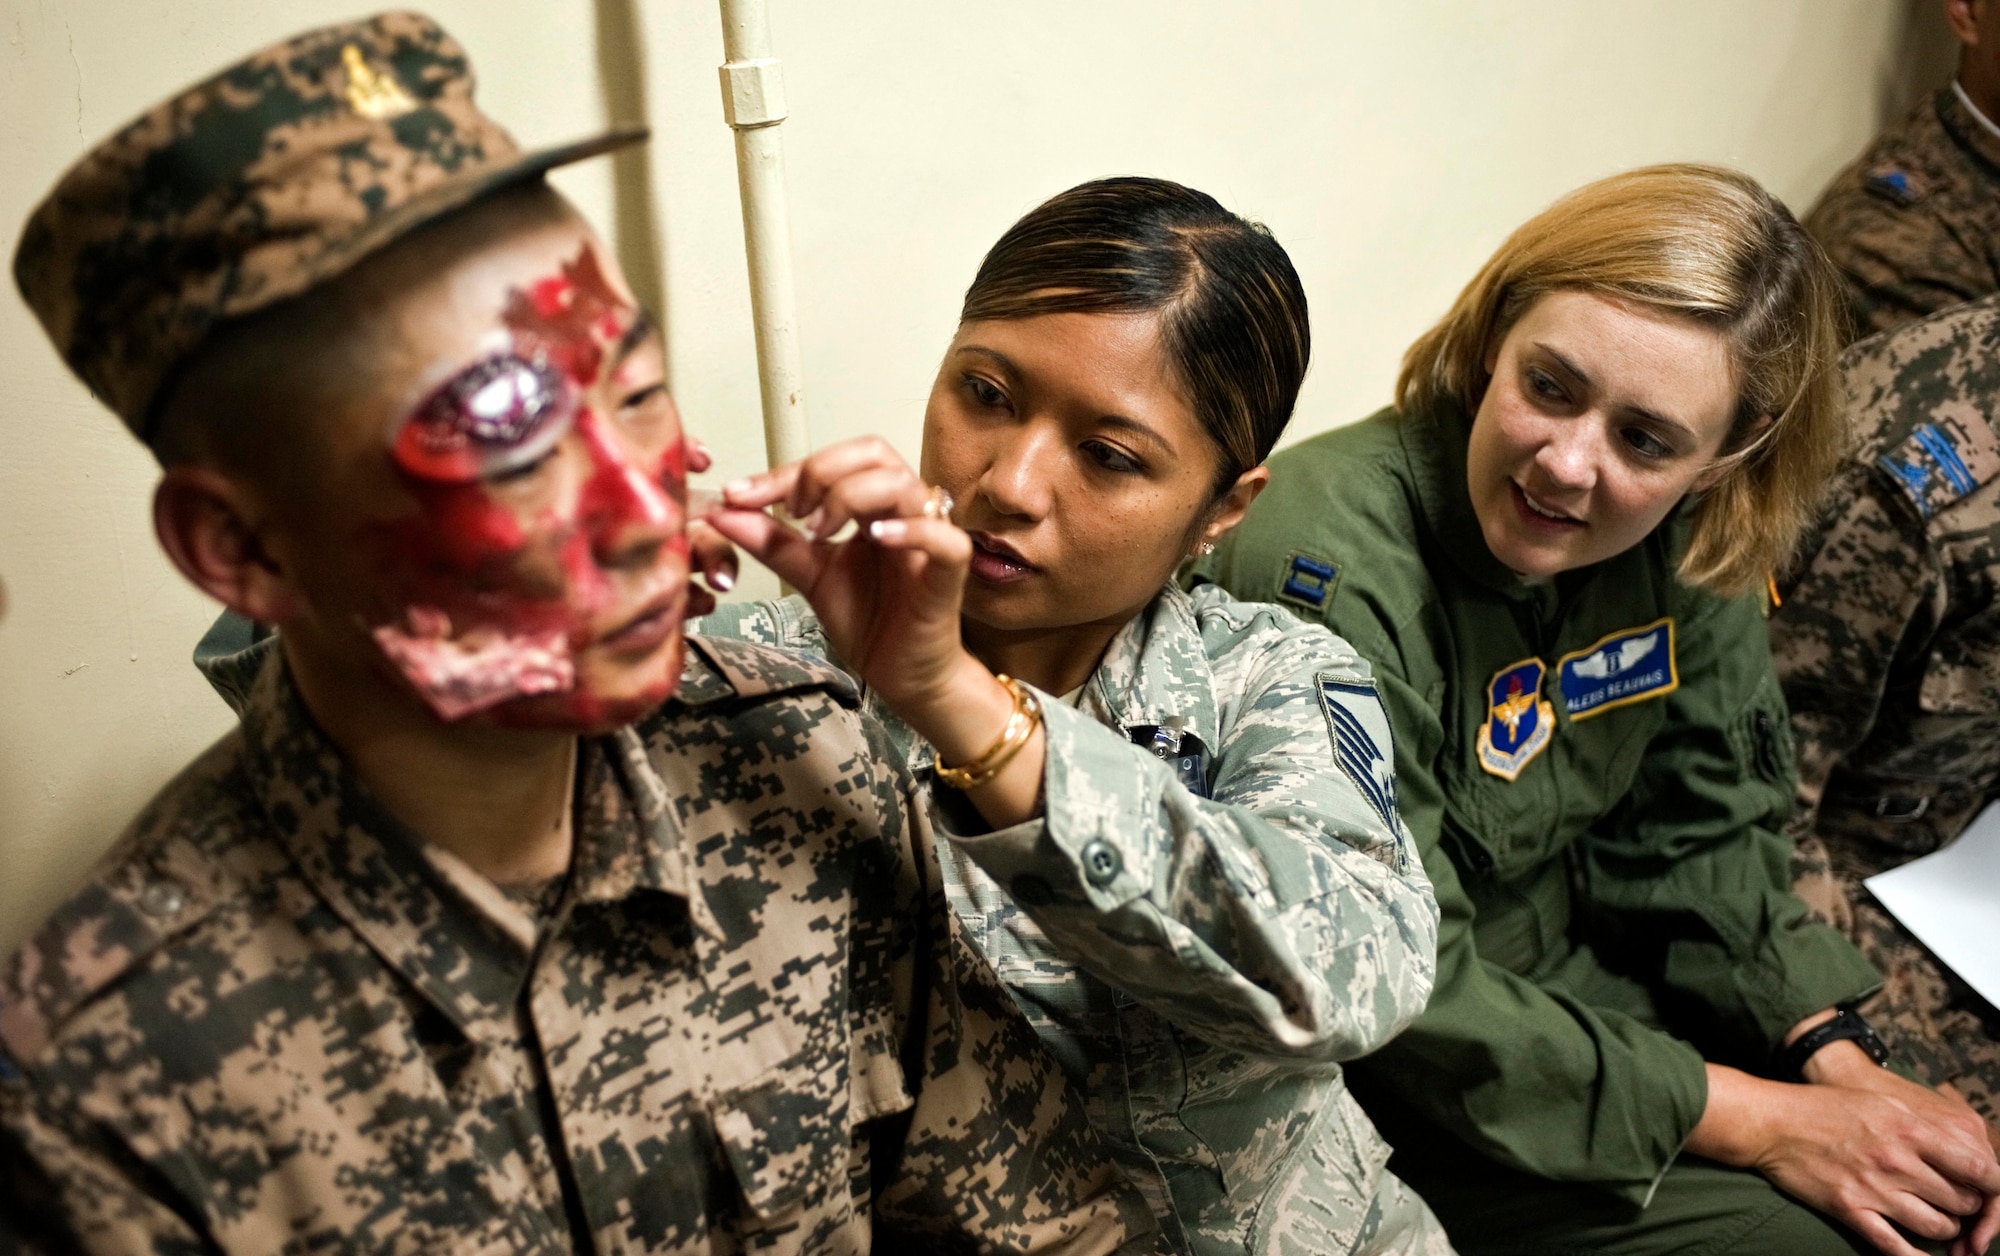 U.S. Air Force Master Sgt. Victoria Grey, middle, and Capt. Alexis Beauvais moulage a member of the Mongolian armed forces as part of mass casualty response training during Operation Pacific Angel 14-4 Mongolia, Aug. 8 2014, in Ulaanbaatar, Mongolia. Operation PACANGEL helps cultivate common bonds and fosters goodwill between the U.S., Mongolia and regional nations by conducting multilateral humanitarian assistance and civil military operations. Grey and Beauvais are medical subject matter expert instructors. (U.S. Air Force photo/Staff Sgt. William Banton)